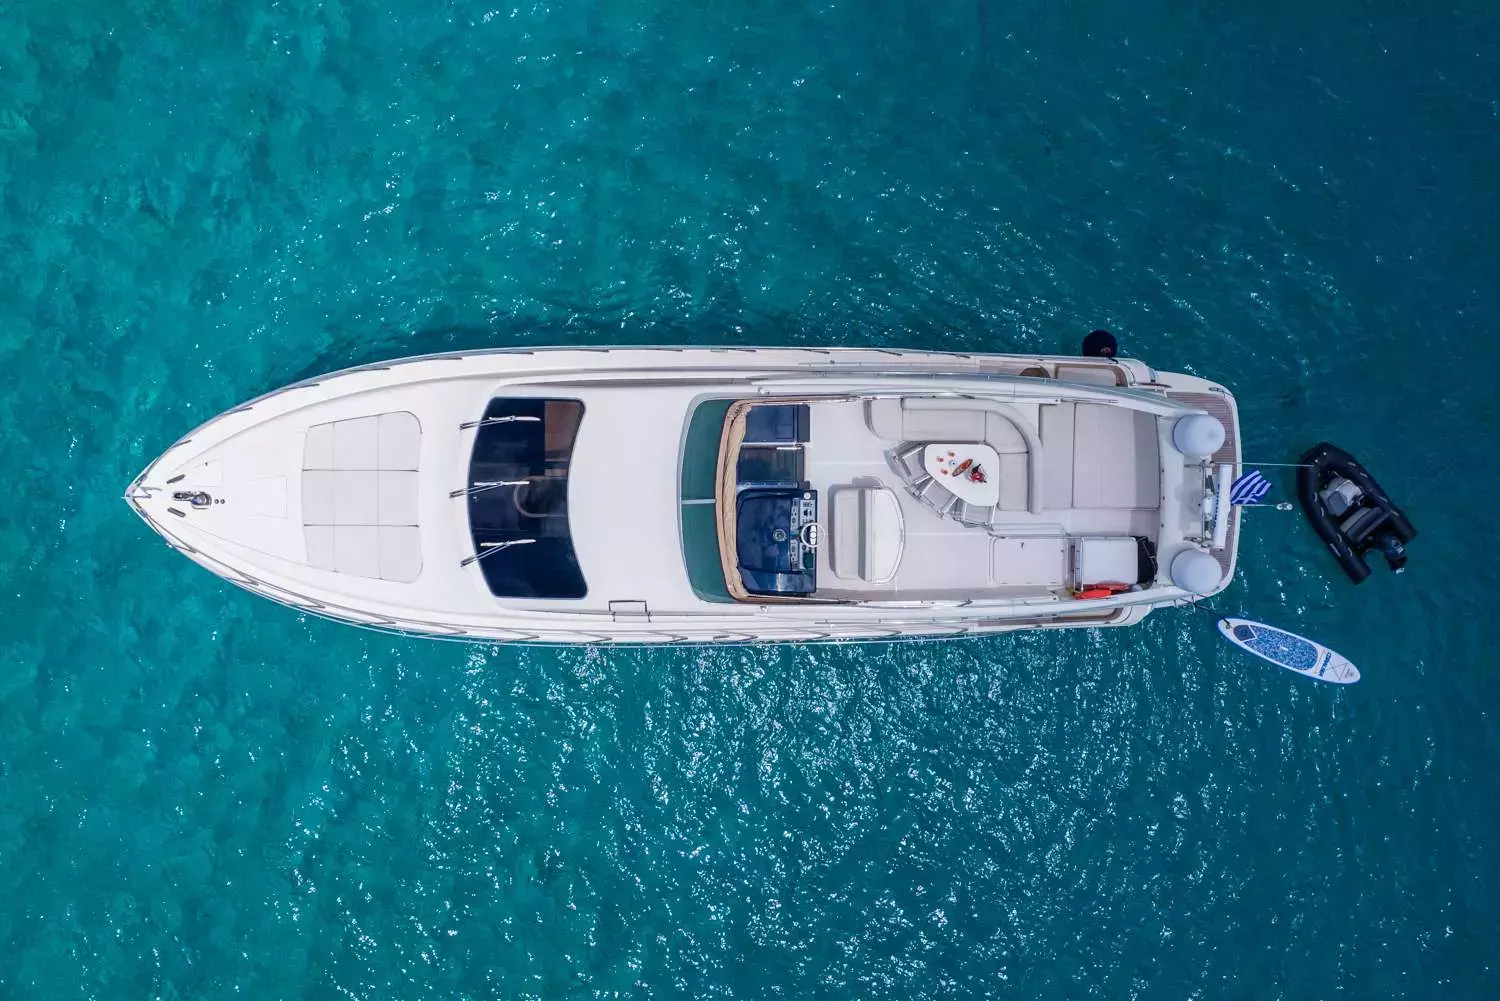 Antamar II by Riva - Top rates for a Charter of a private Motor Yacht in Greece